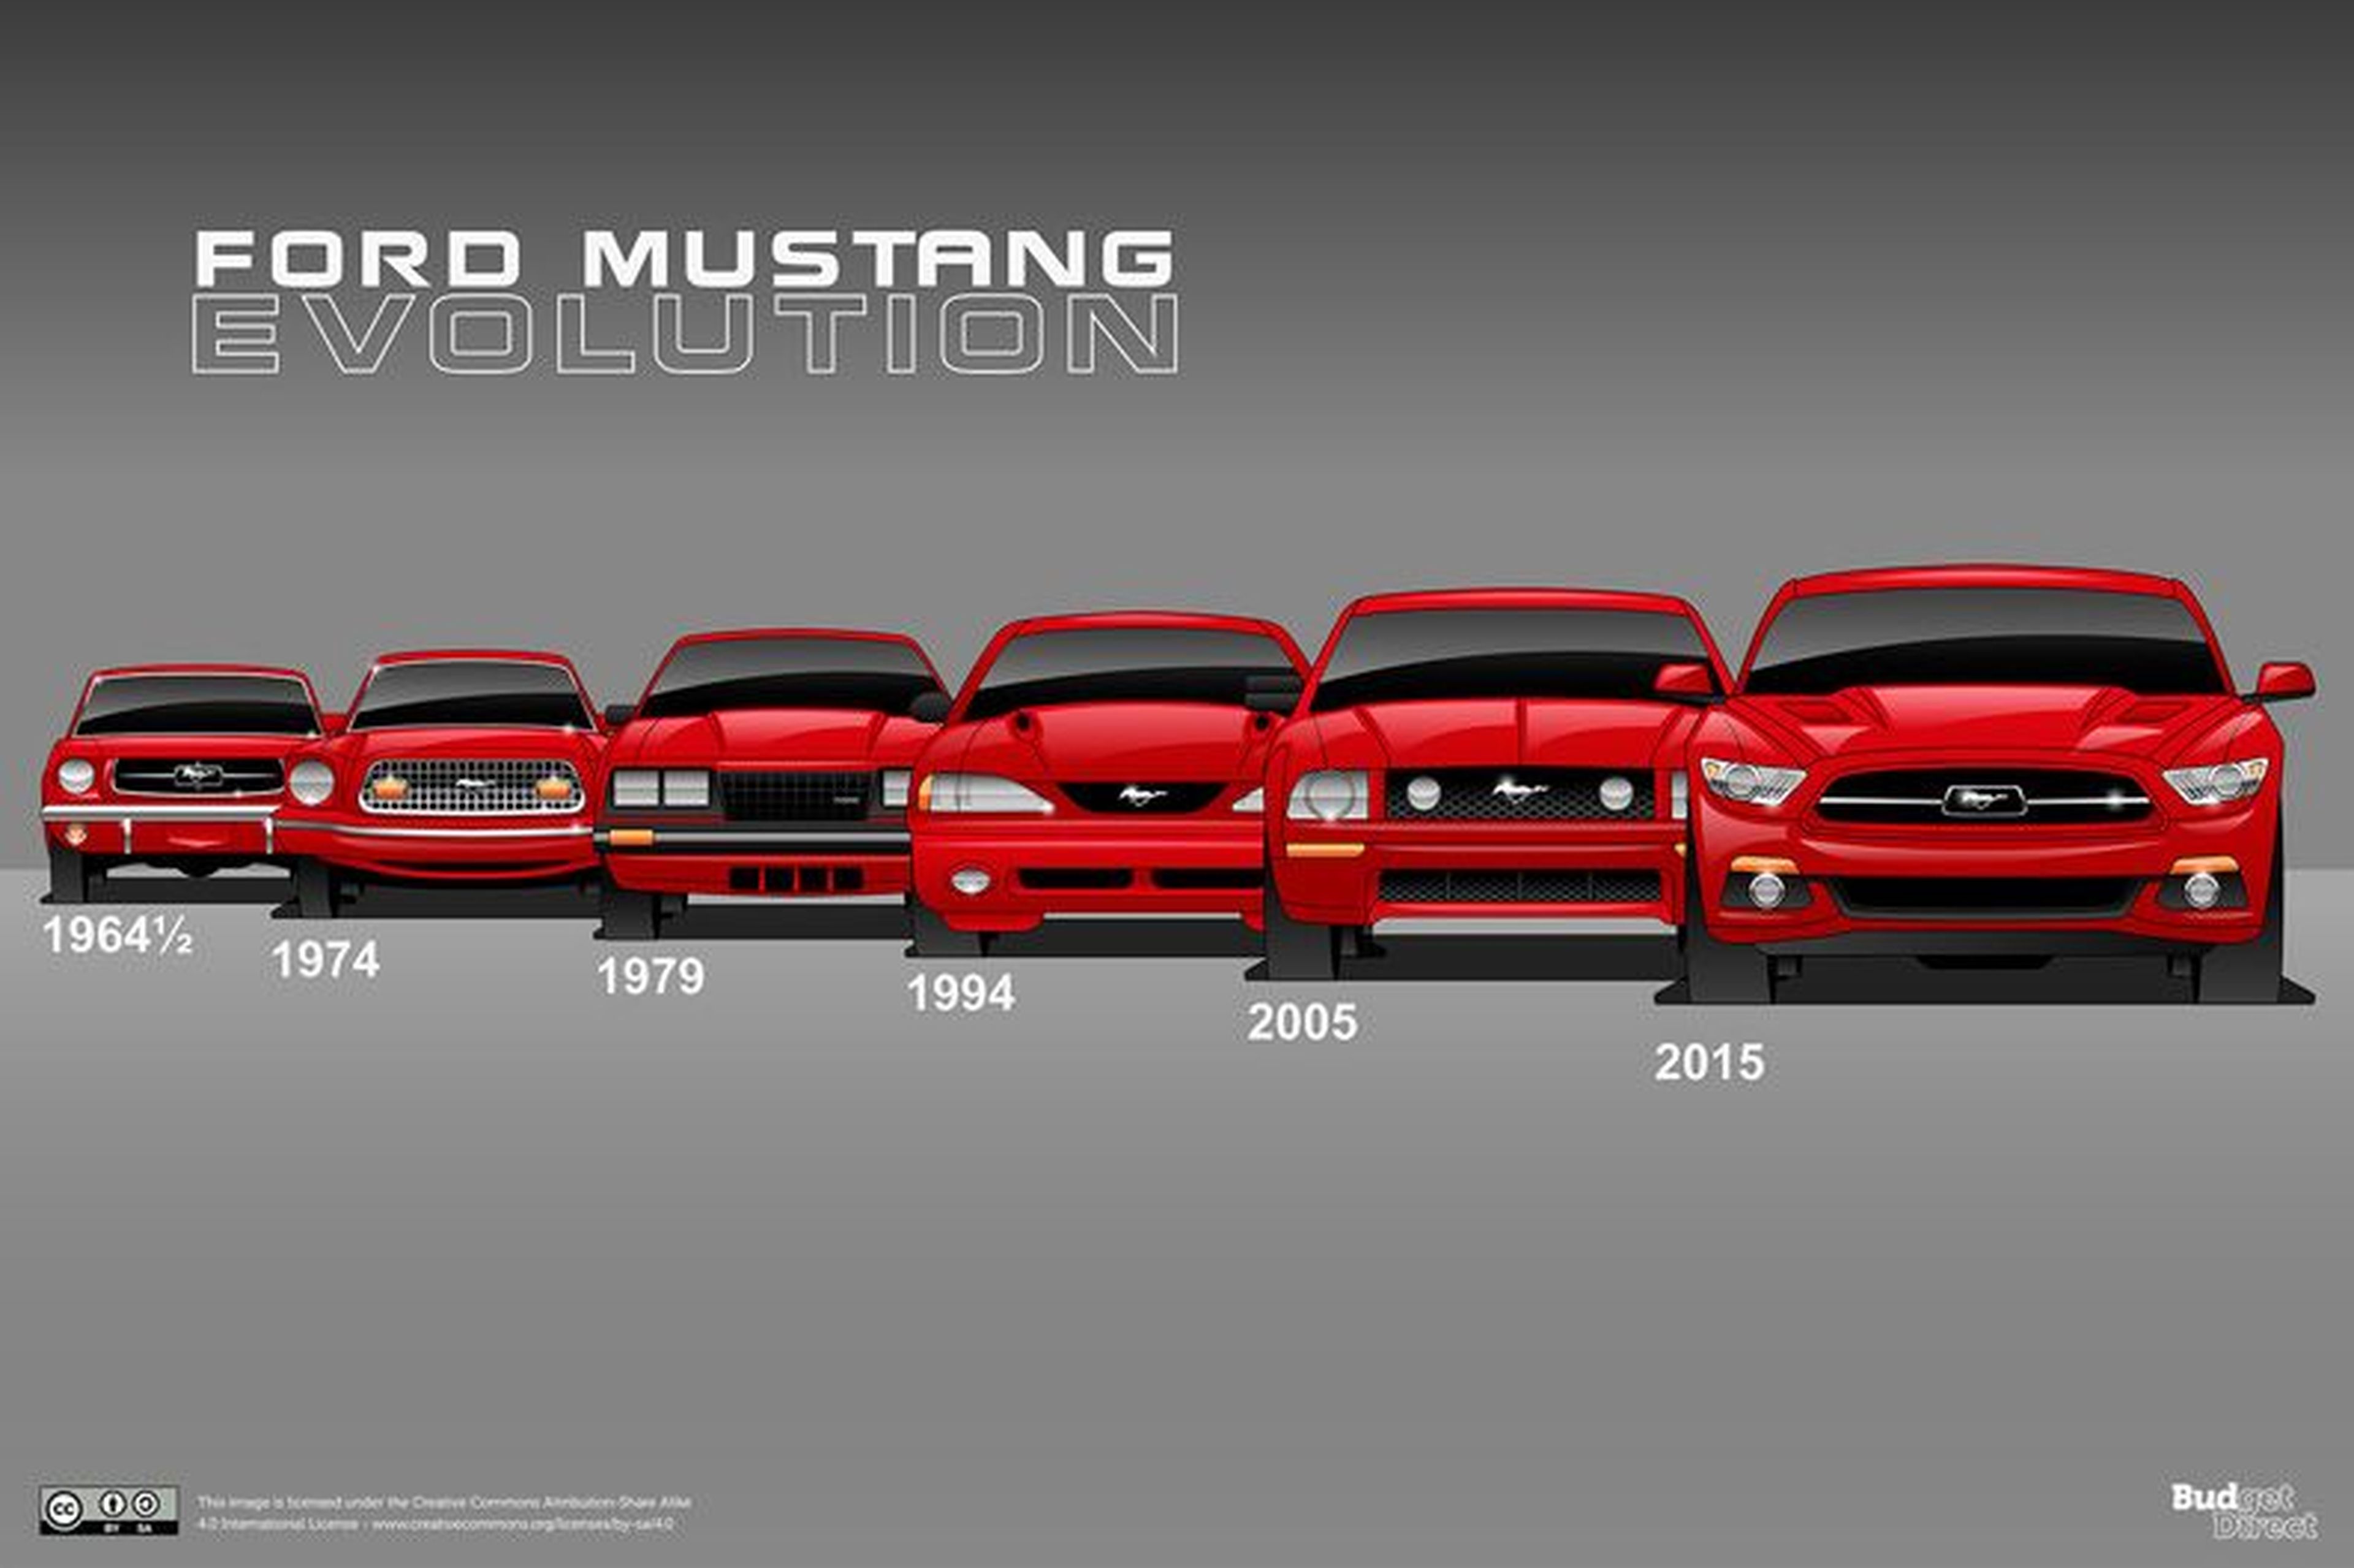 Diseño incombustible: Ford Mustang